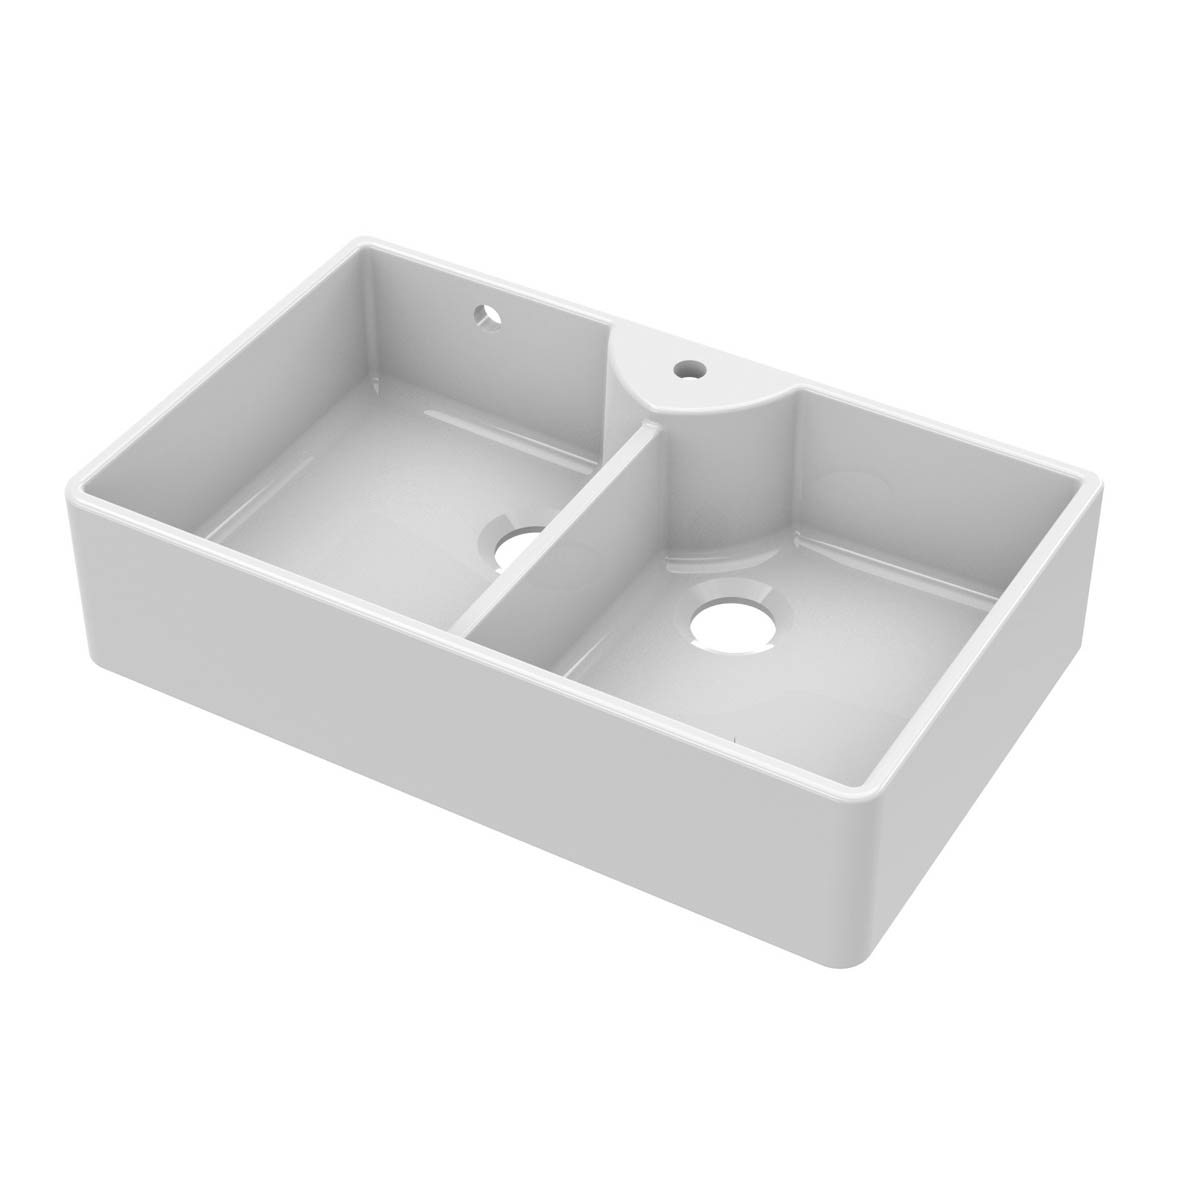 Nuie Butler Double Bowl 895x550x220mm Fireclay Sink with Stepped Weir, Tap Hole & Overflow - White (20299)